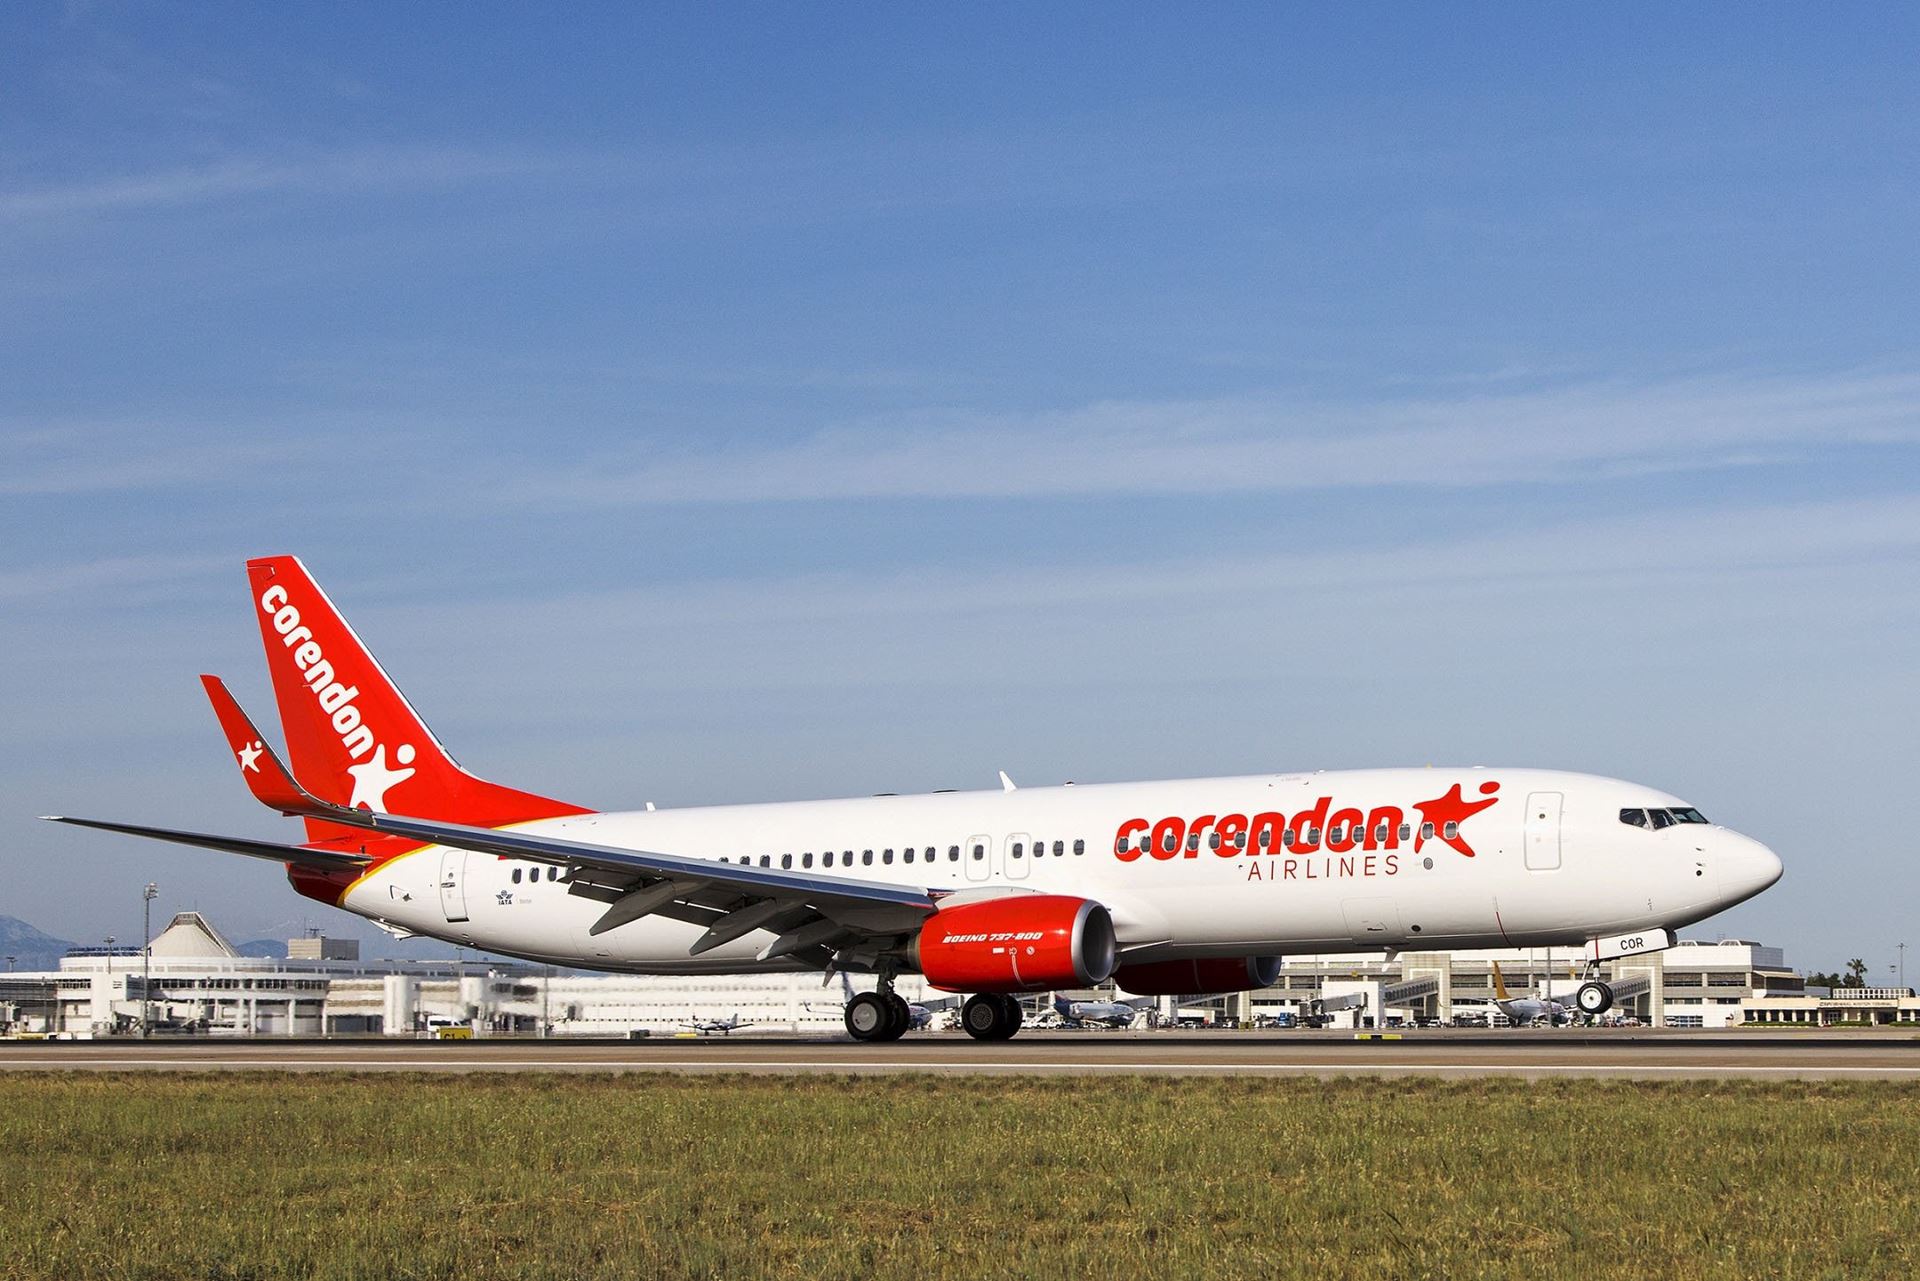 Corendon Airlines had to cancel flights due to certain issues at European airports